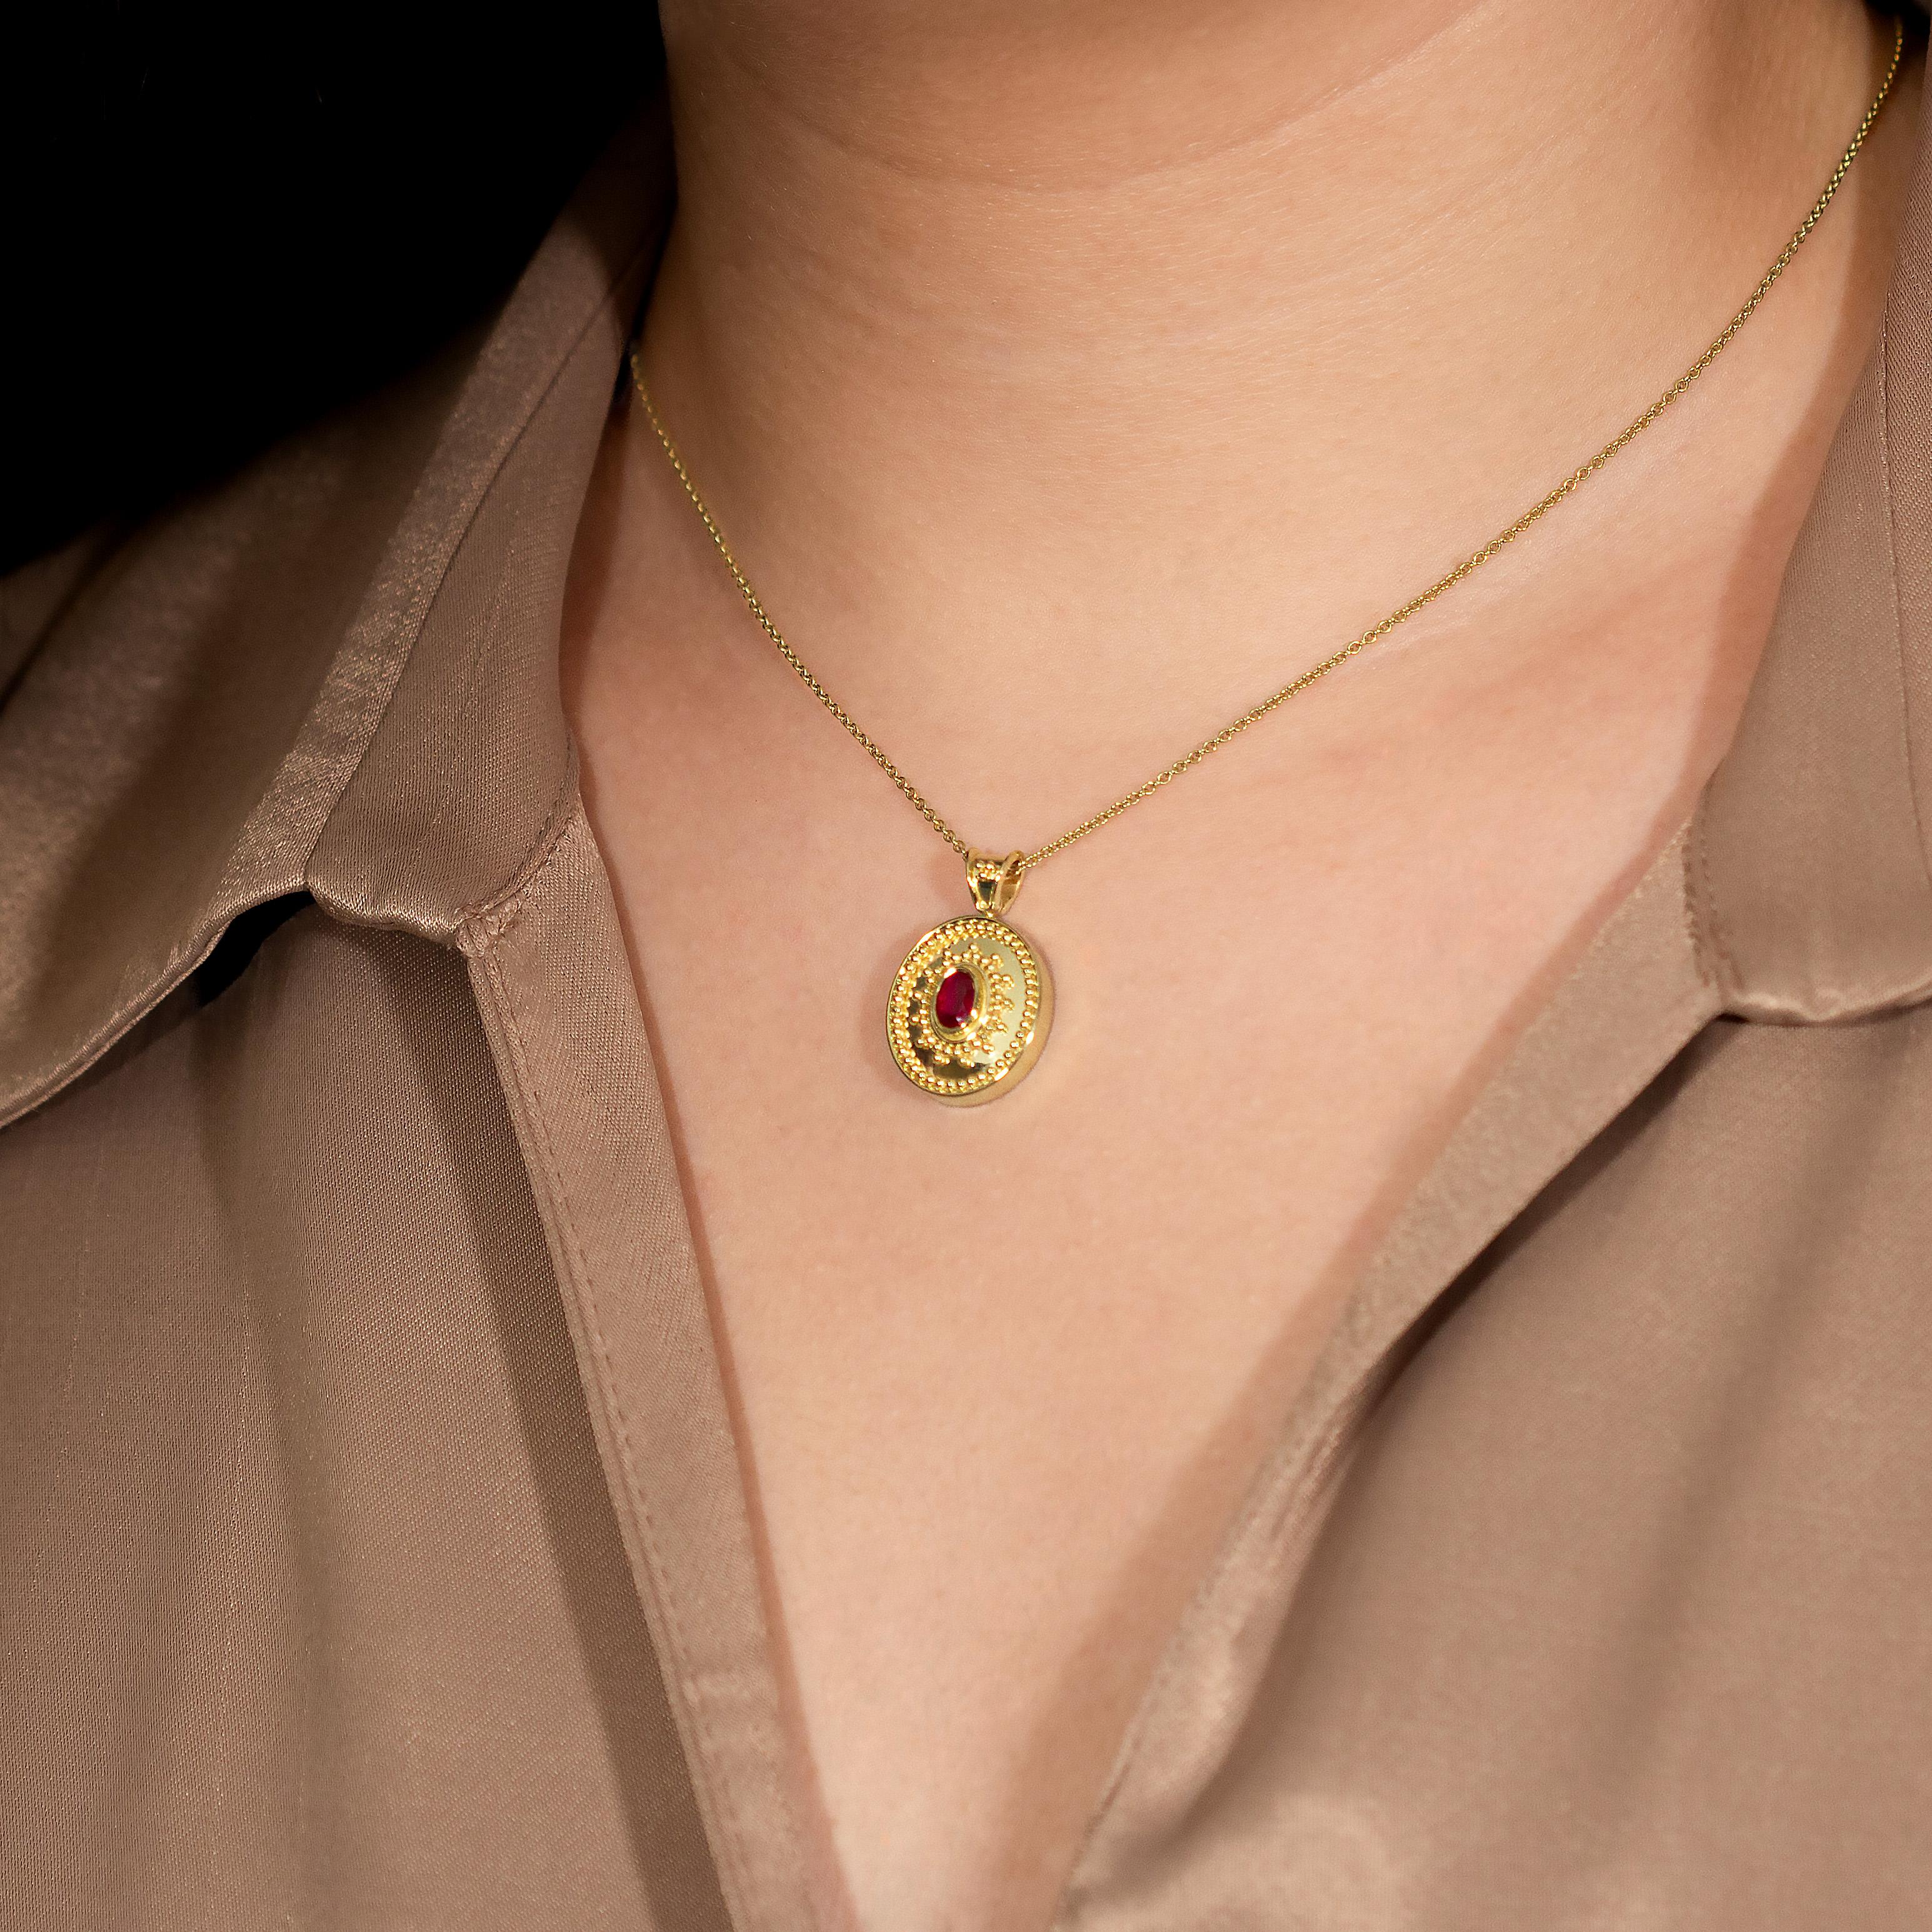 Adorn yourself with our gleaming oval gold pendant, showcasing a captivating oval deep red ruby encircled by a symphony of meticulously crafted granulations, A symbol of timeless elegance and enduring allure.

100% handmade in our workshop.

Metal: